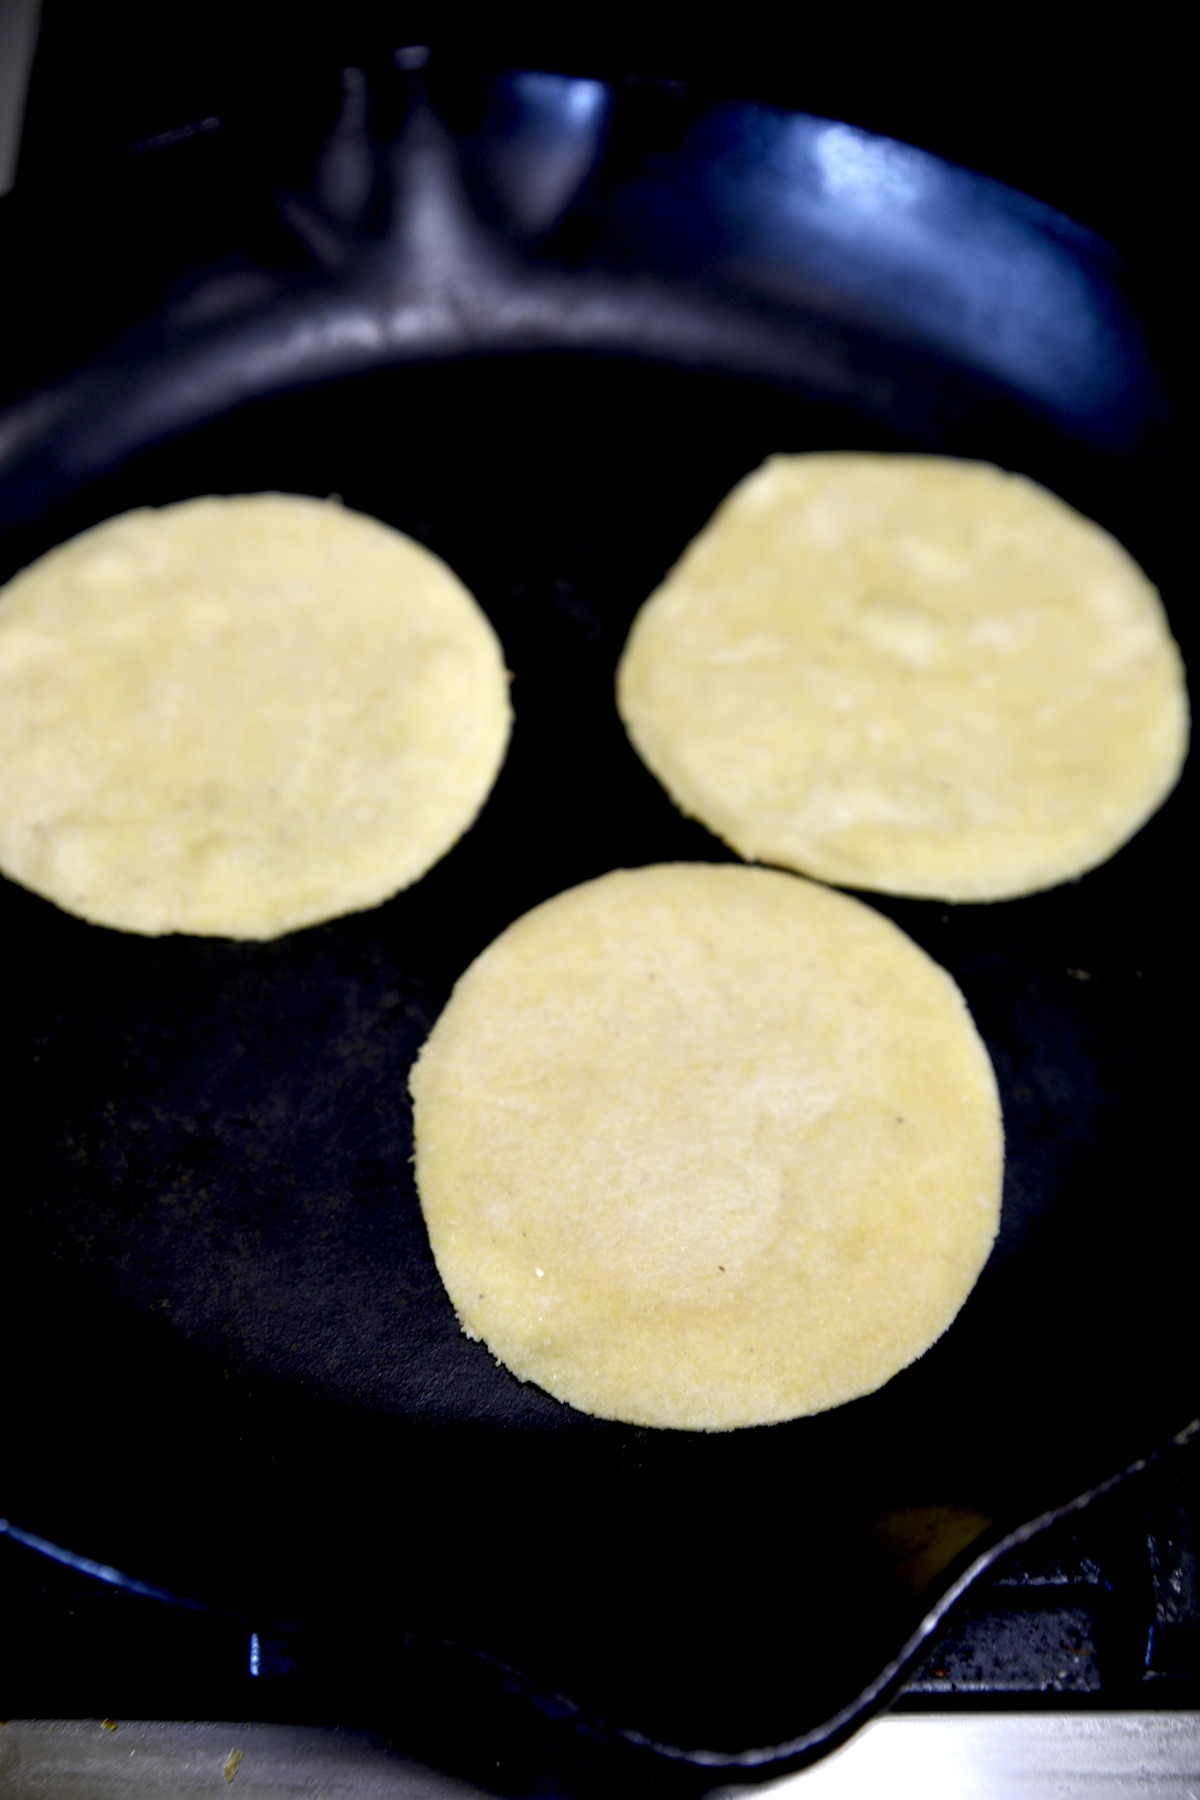 Cooking 3 tortillas in a skillet.